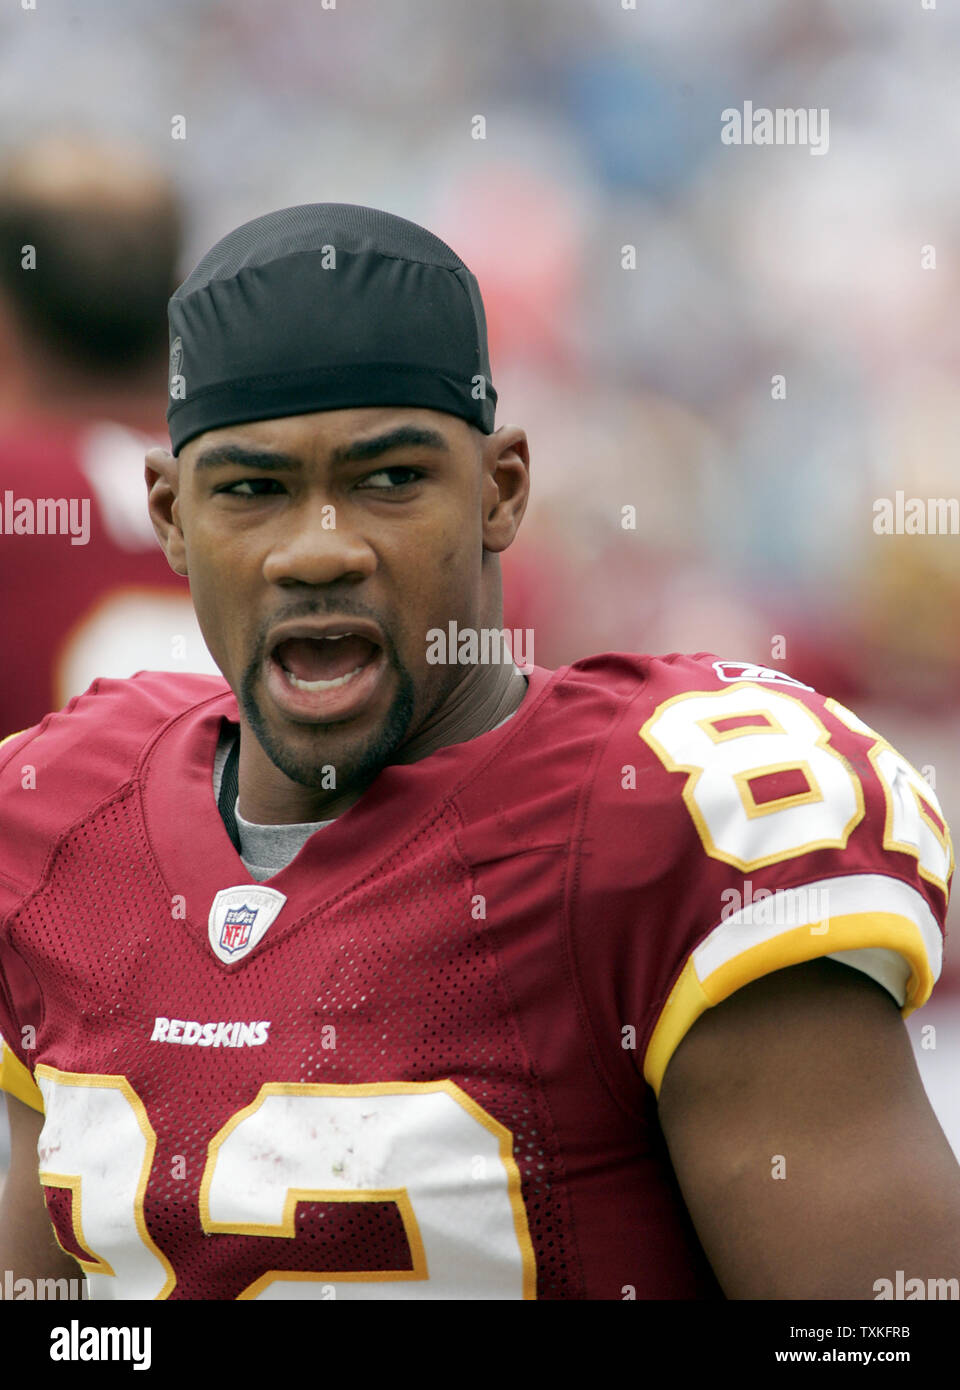 Washington Redskins wide receiver Antwaan Randle El encourages his teammates on the bench as the Redskins play the Carolina Panthers at Bank of America Stadium in Charlotte, North Carolina on October 11, 2009. The Panthers won 20-17.   UPI/Nell Redmond . Stock Photo